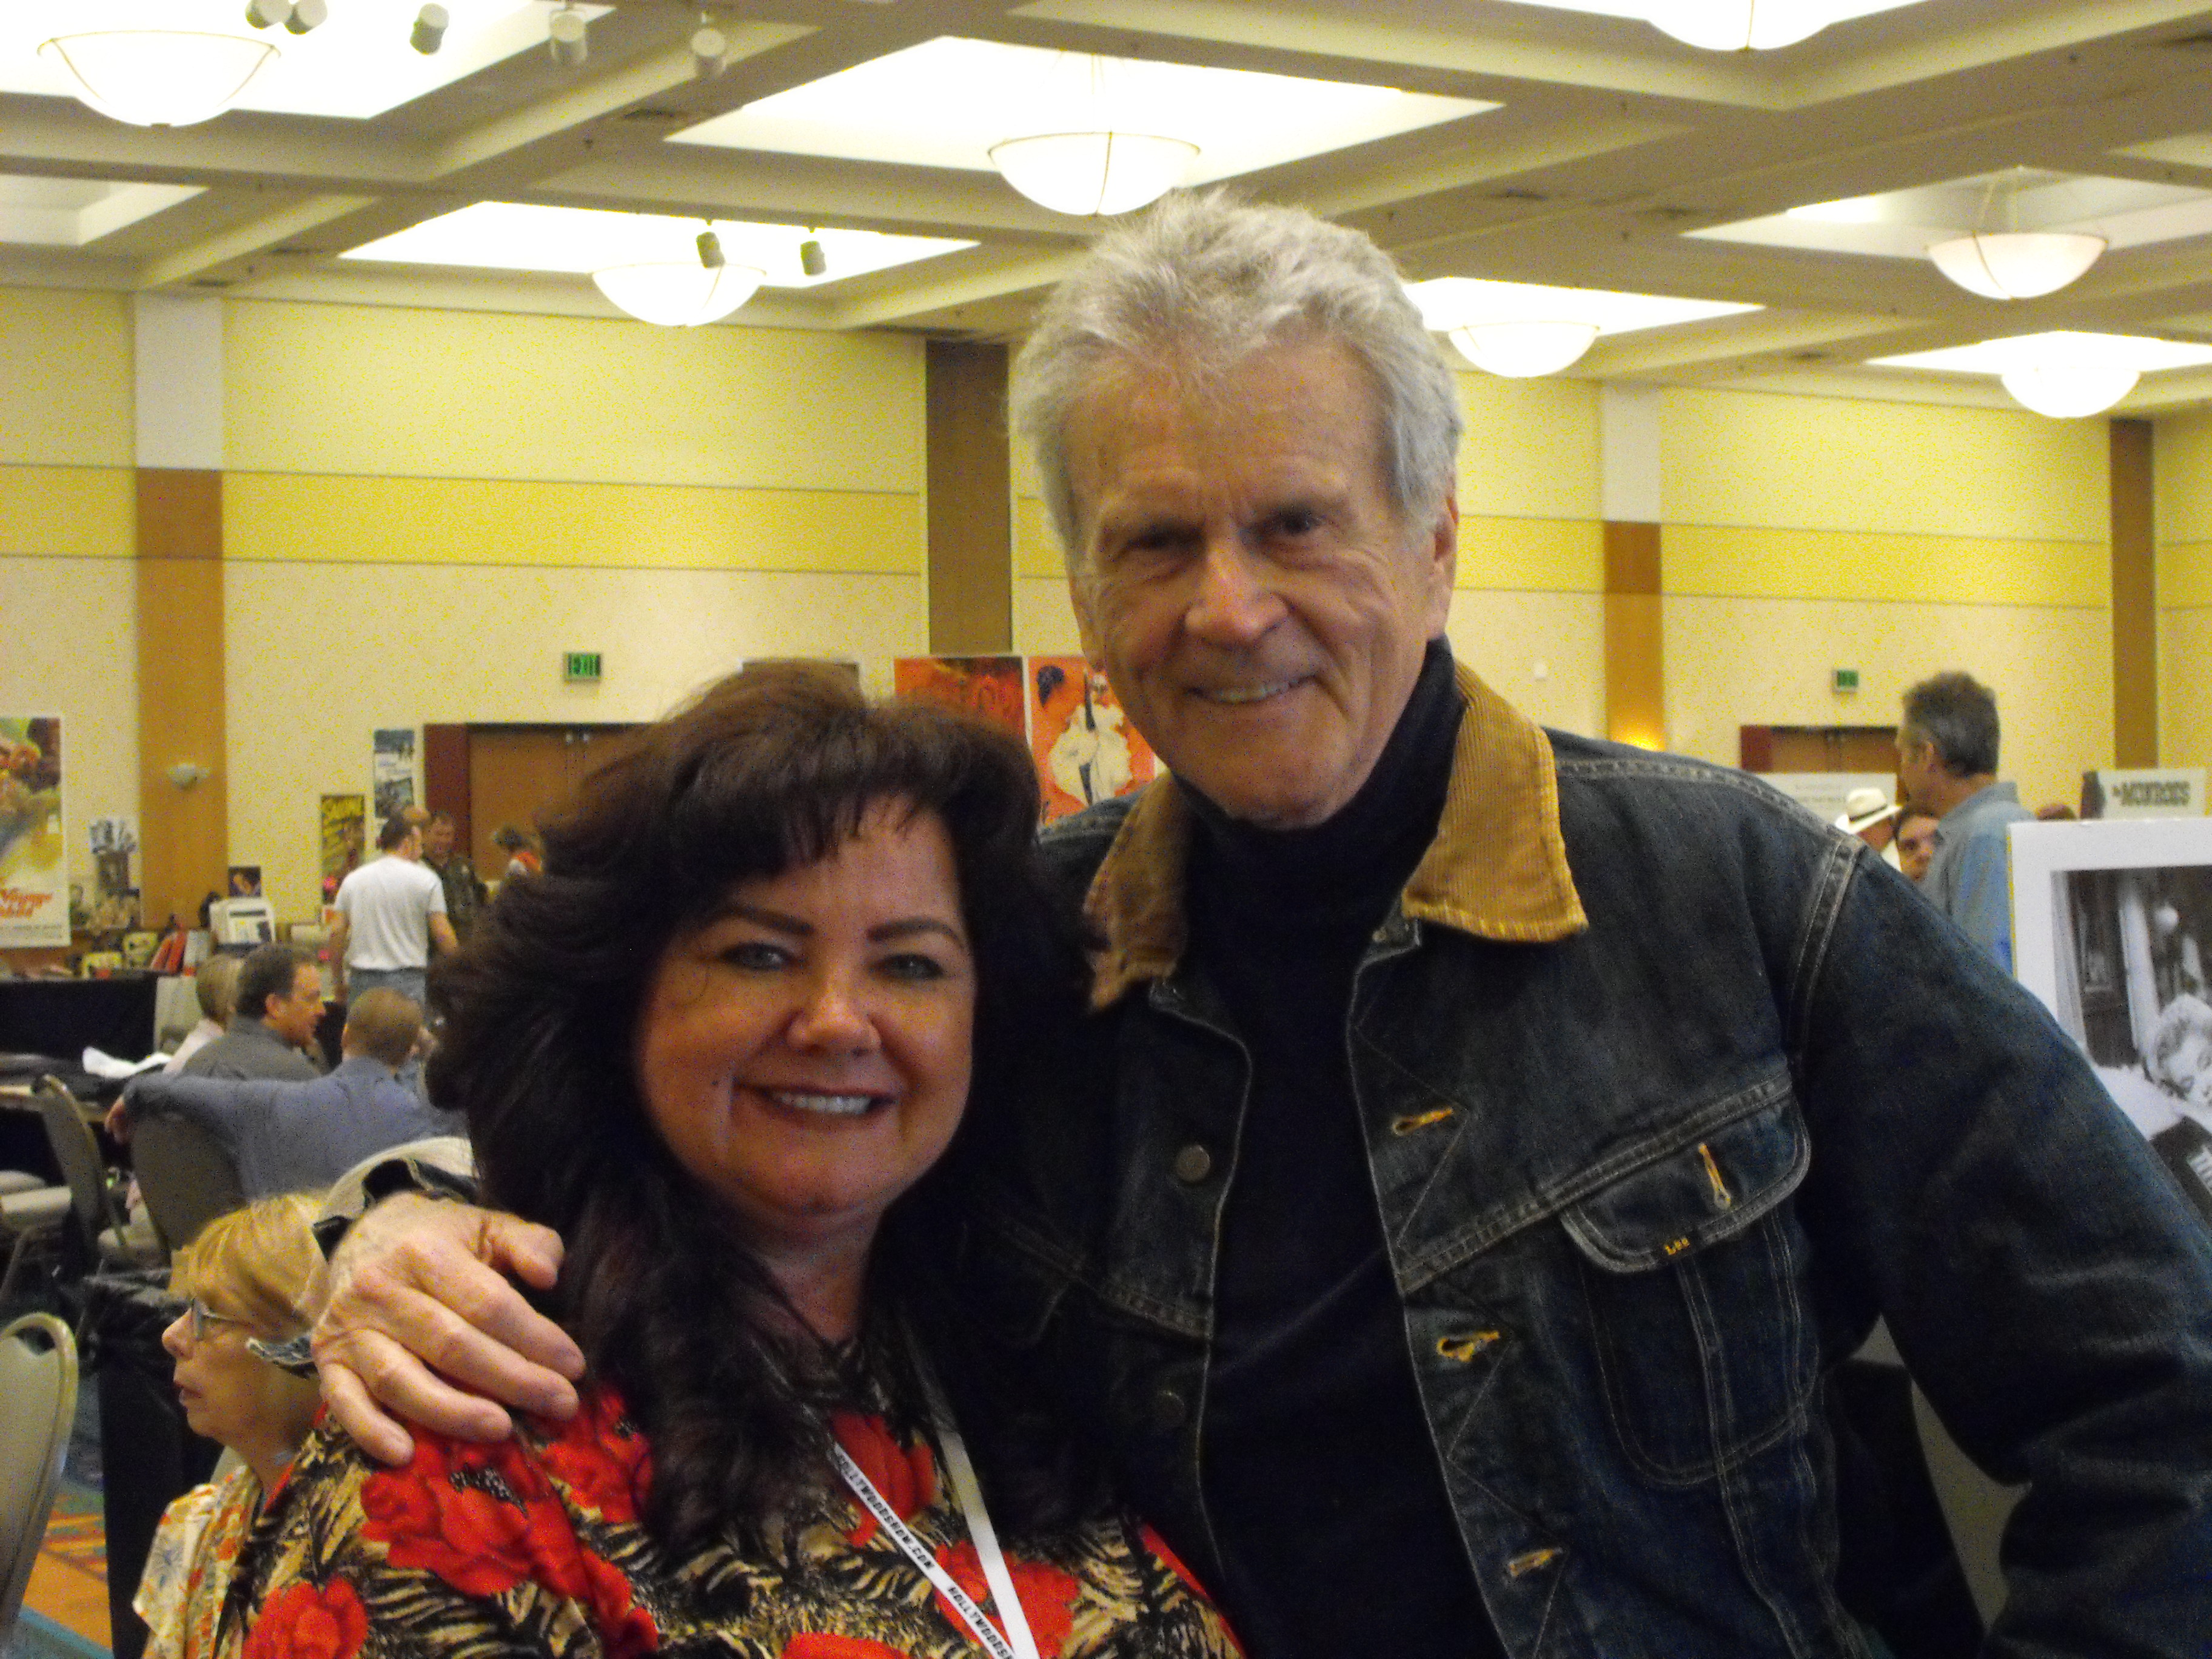 Don Murray and I